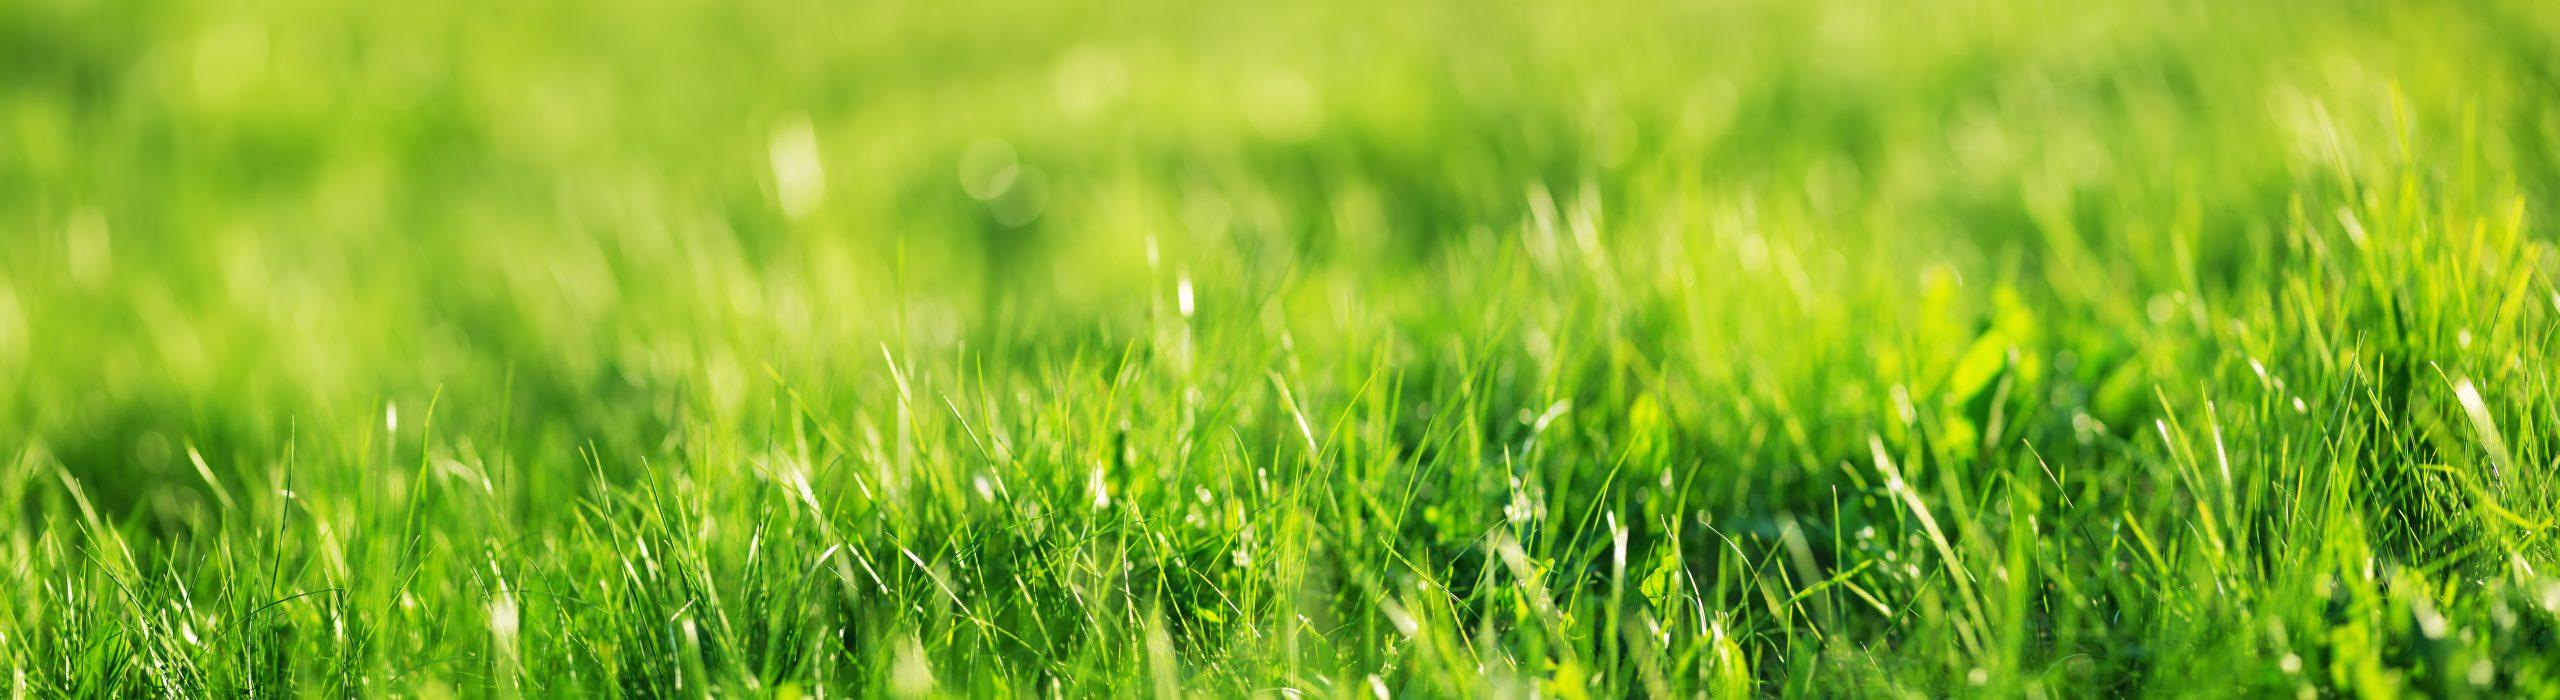 Prep you lawn this spring, organically